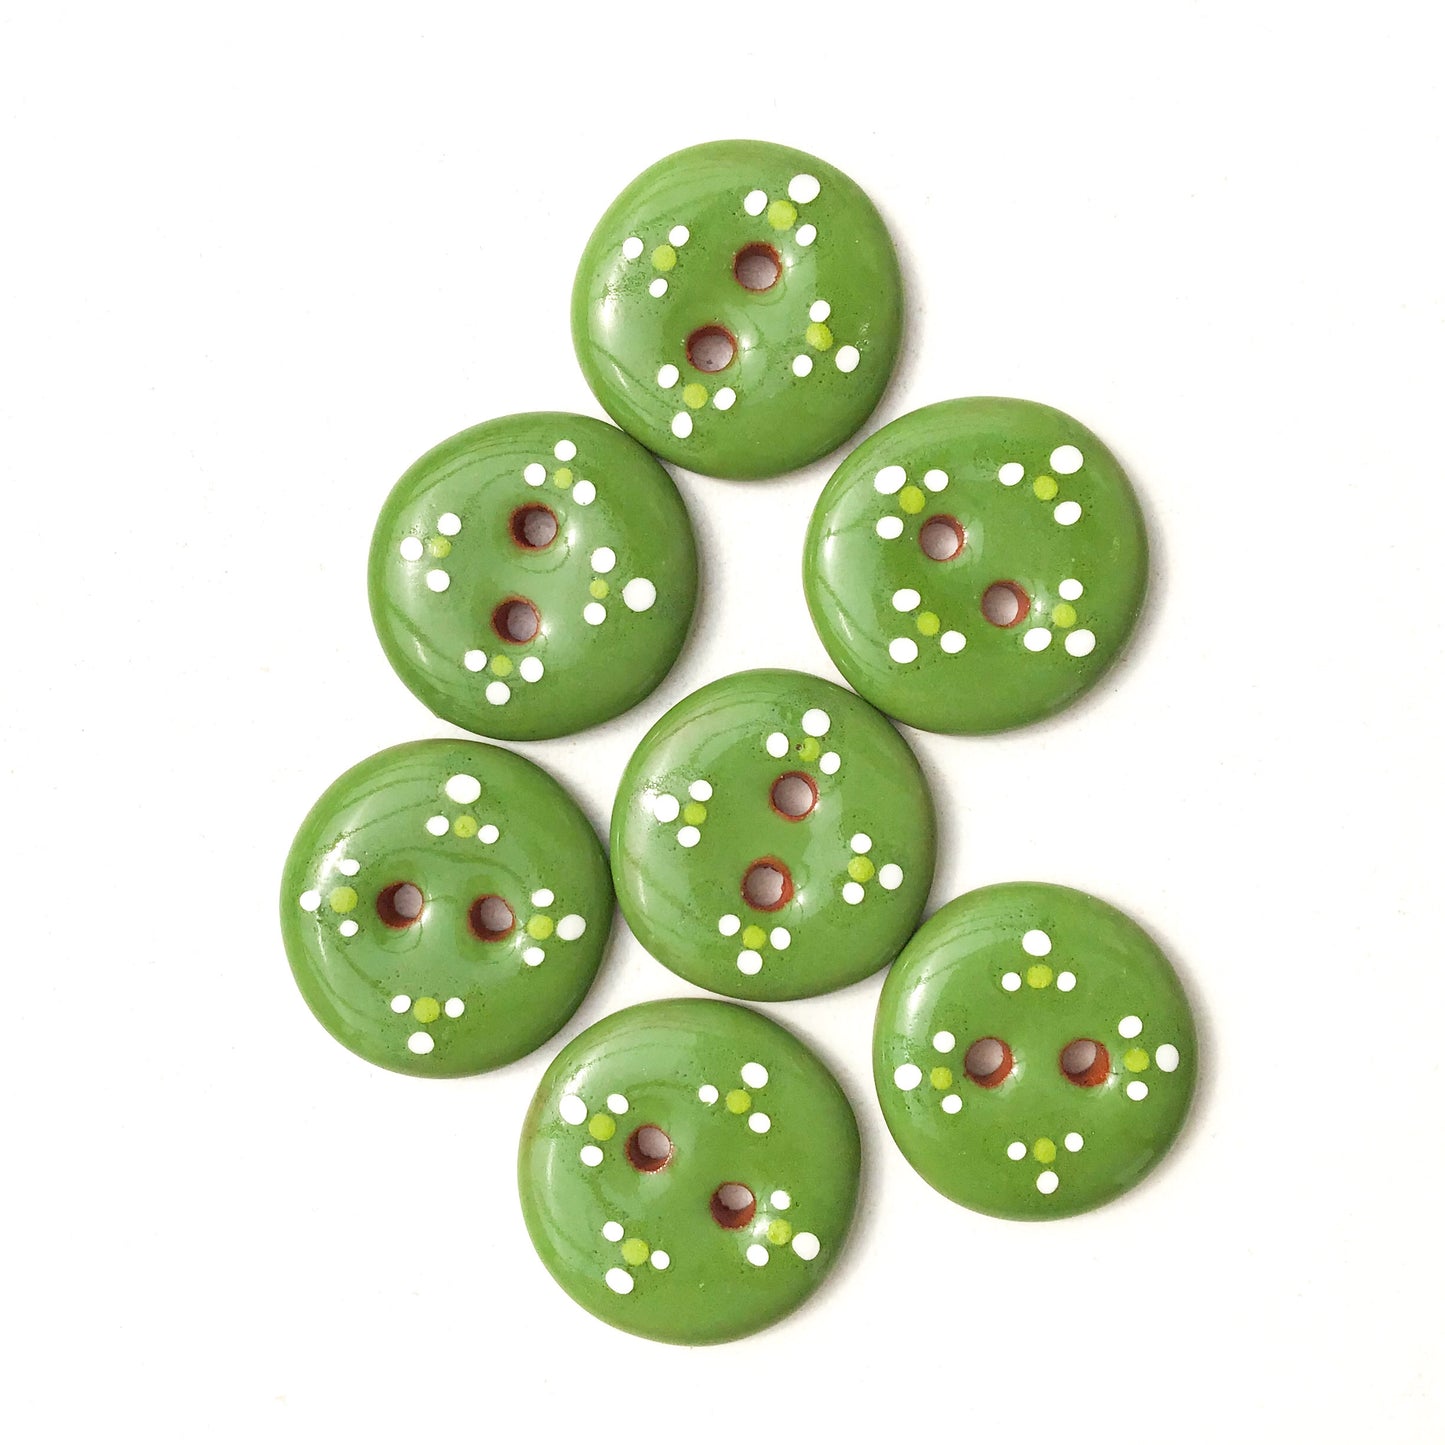 Shamrock Green Decorative Ceramic Buttons - Green Clay Buttons - 11/16" - 7 Pack